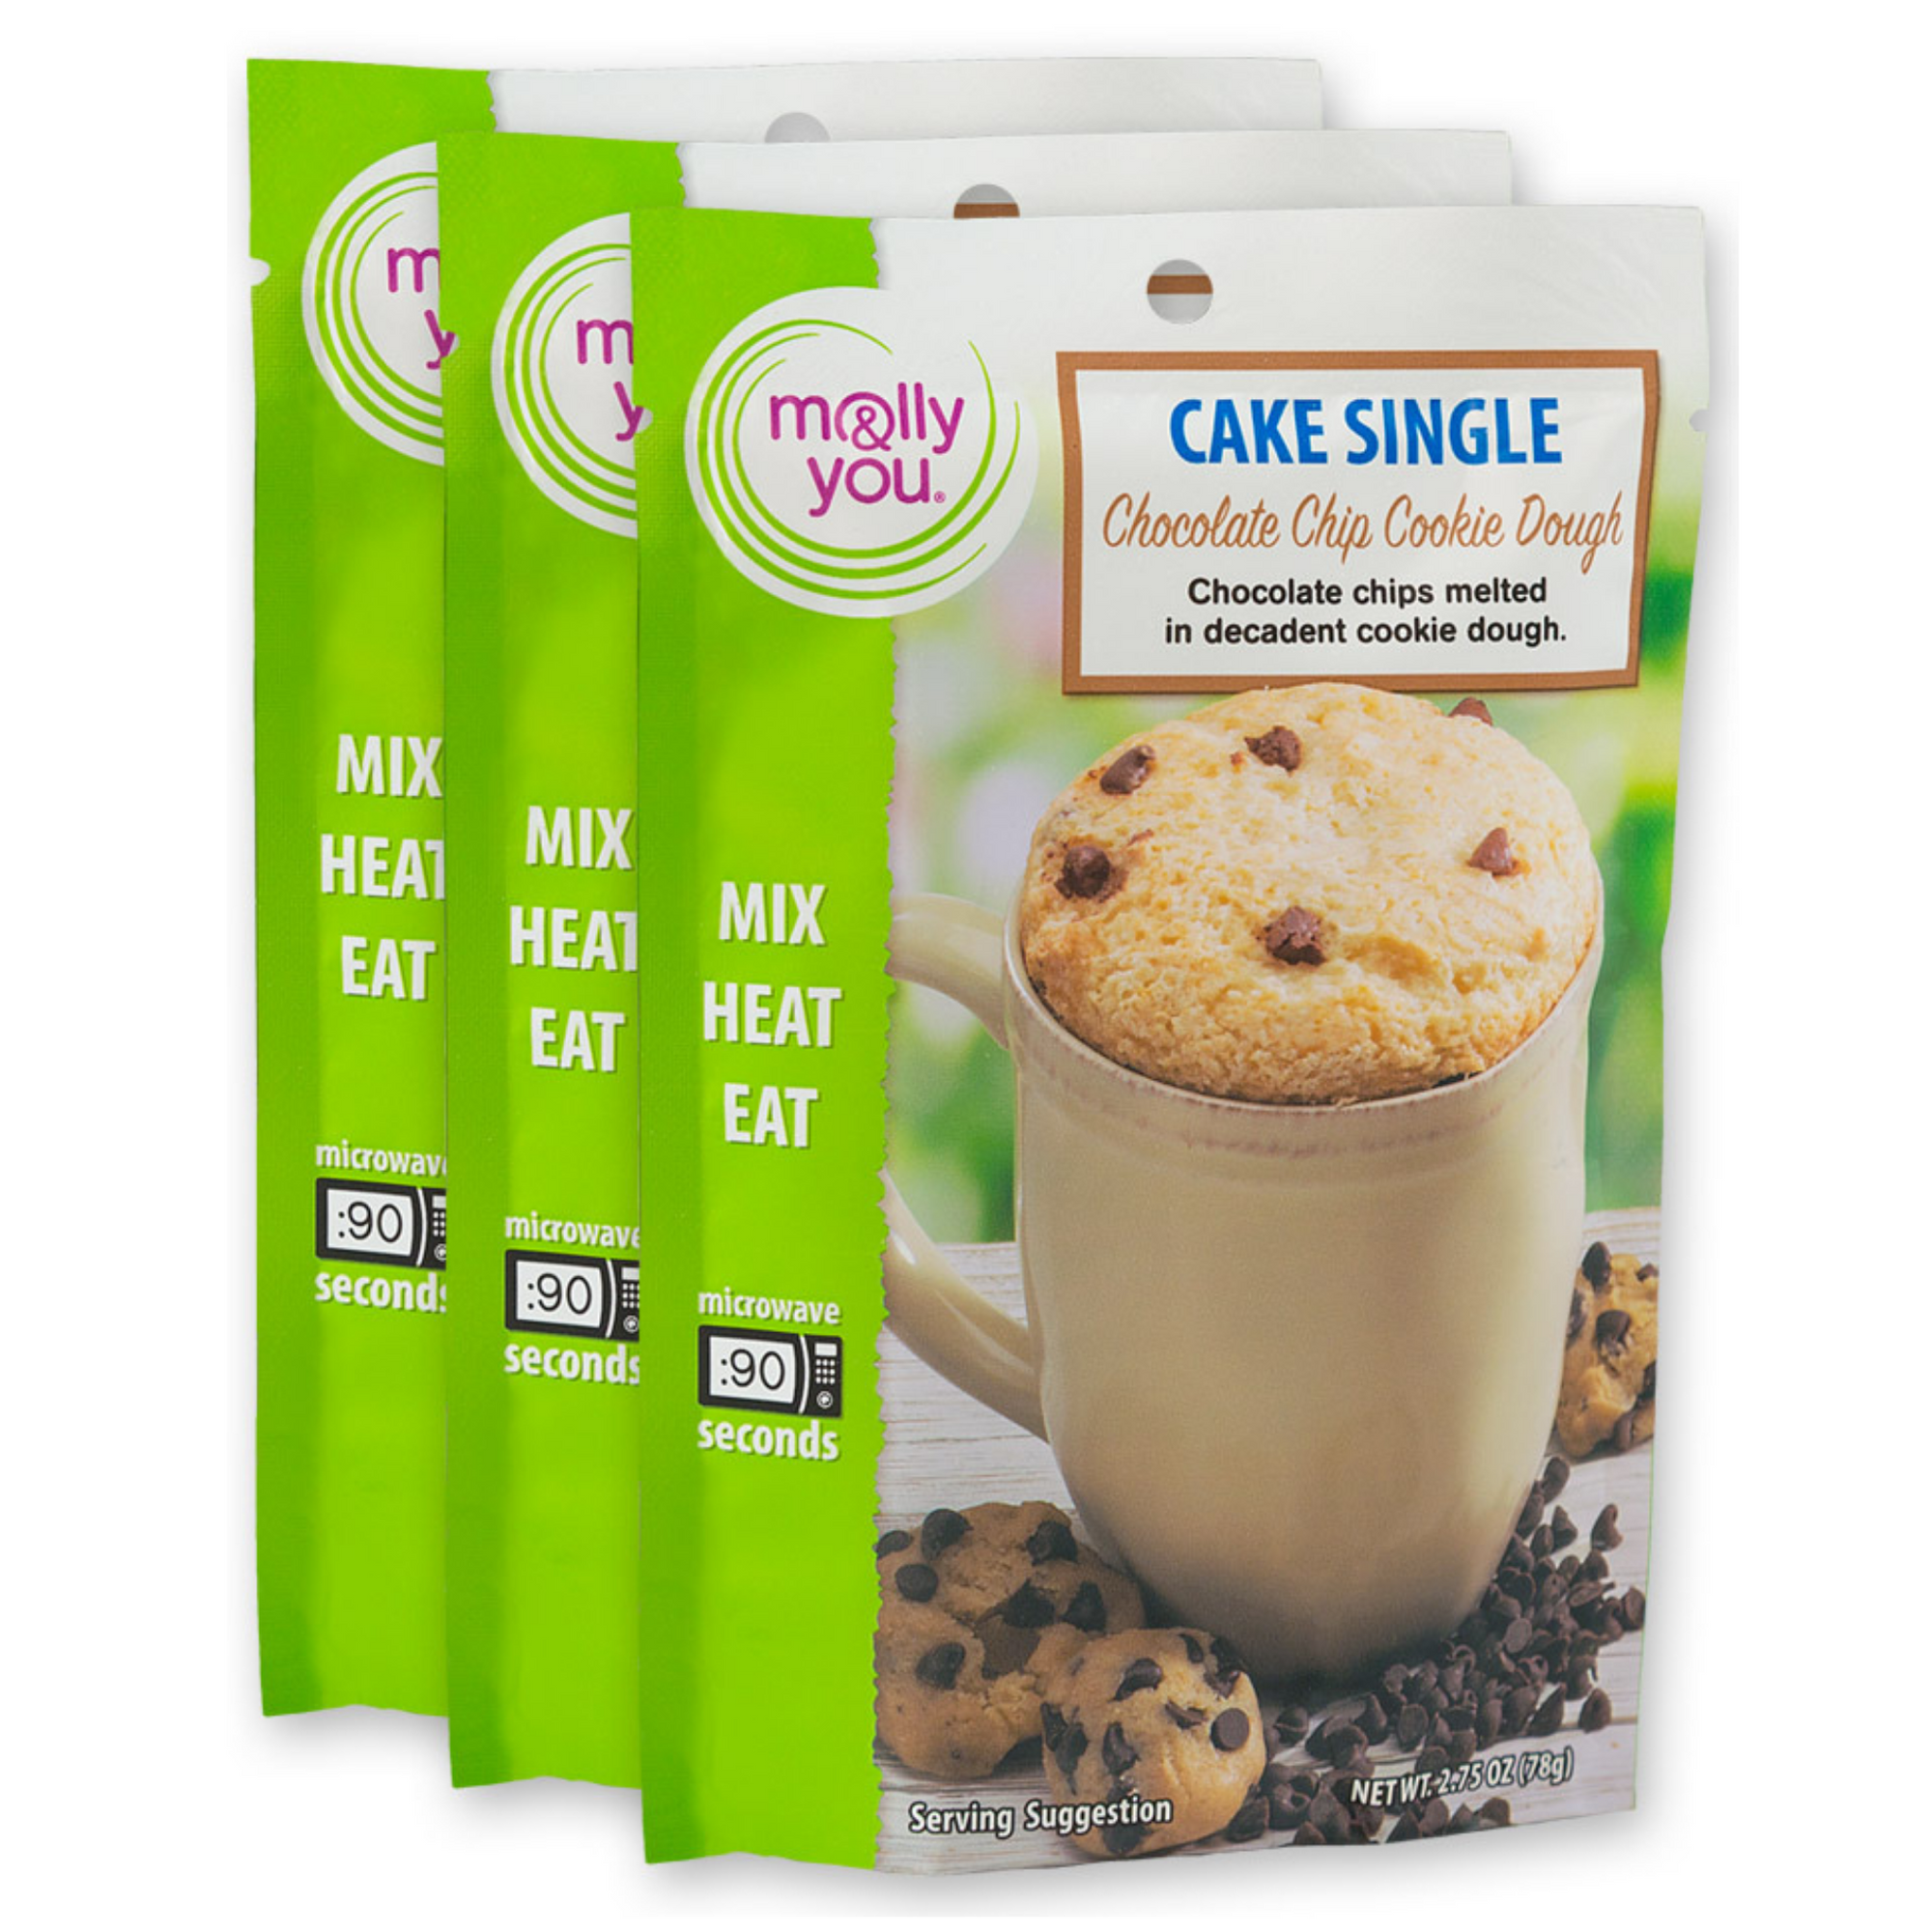 3-Pack of Chocolate Chip Cookie Dough Cake Single